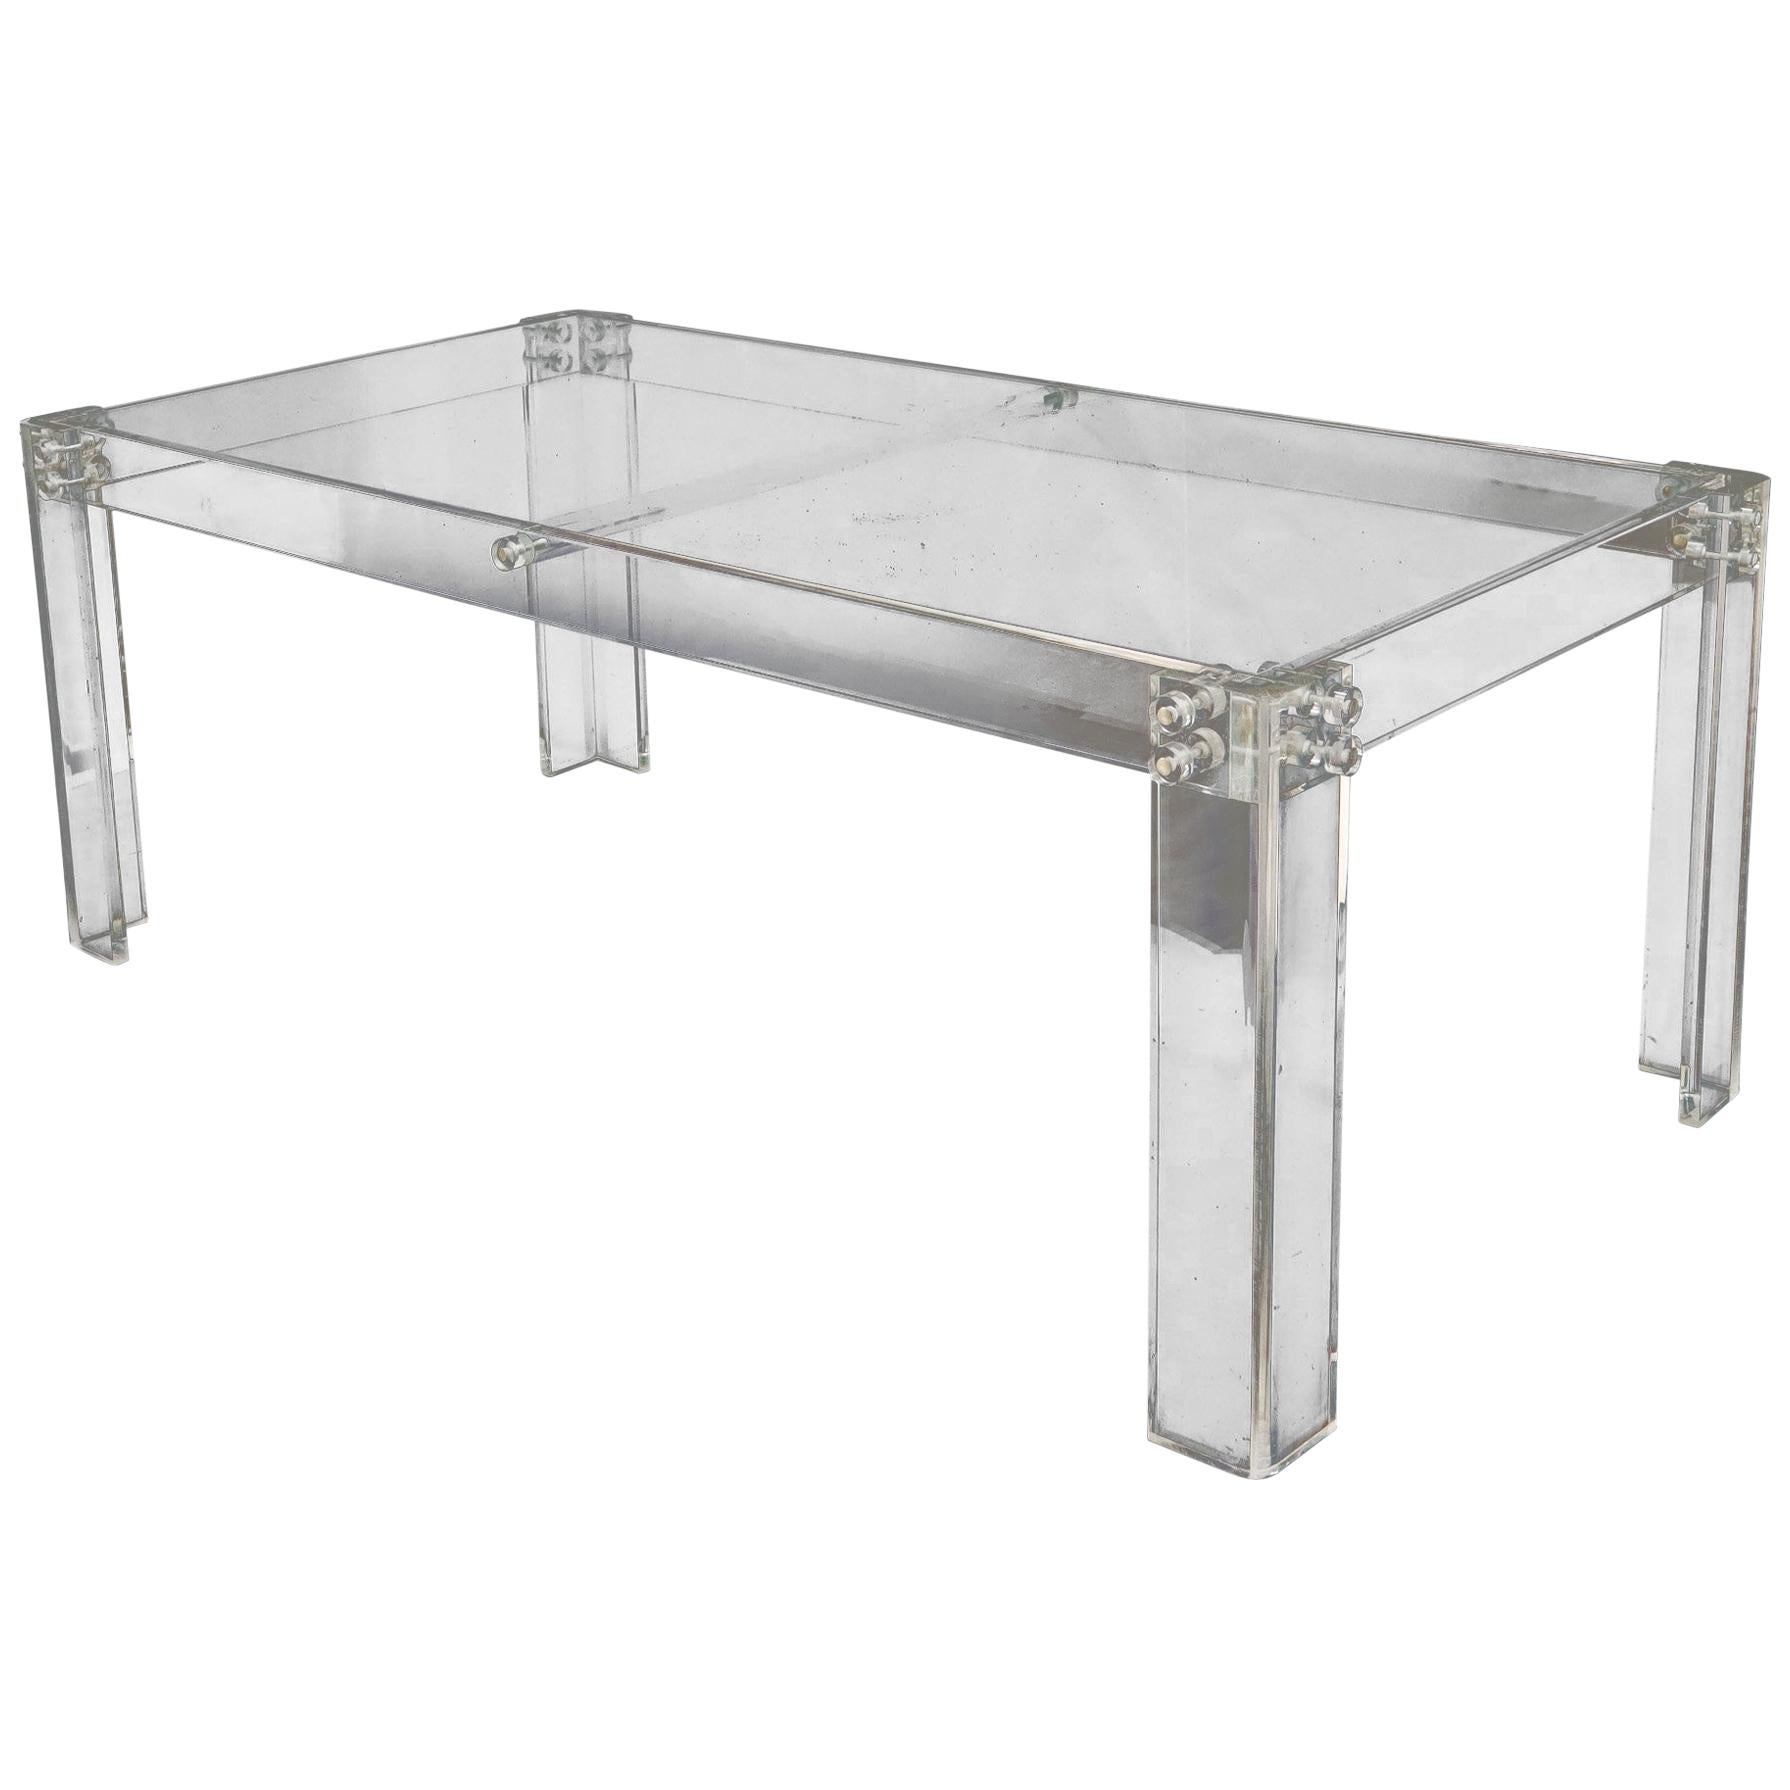 Large Rectangular Bent Lucite Base Glass Top Dining Conference Table 7